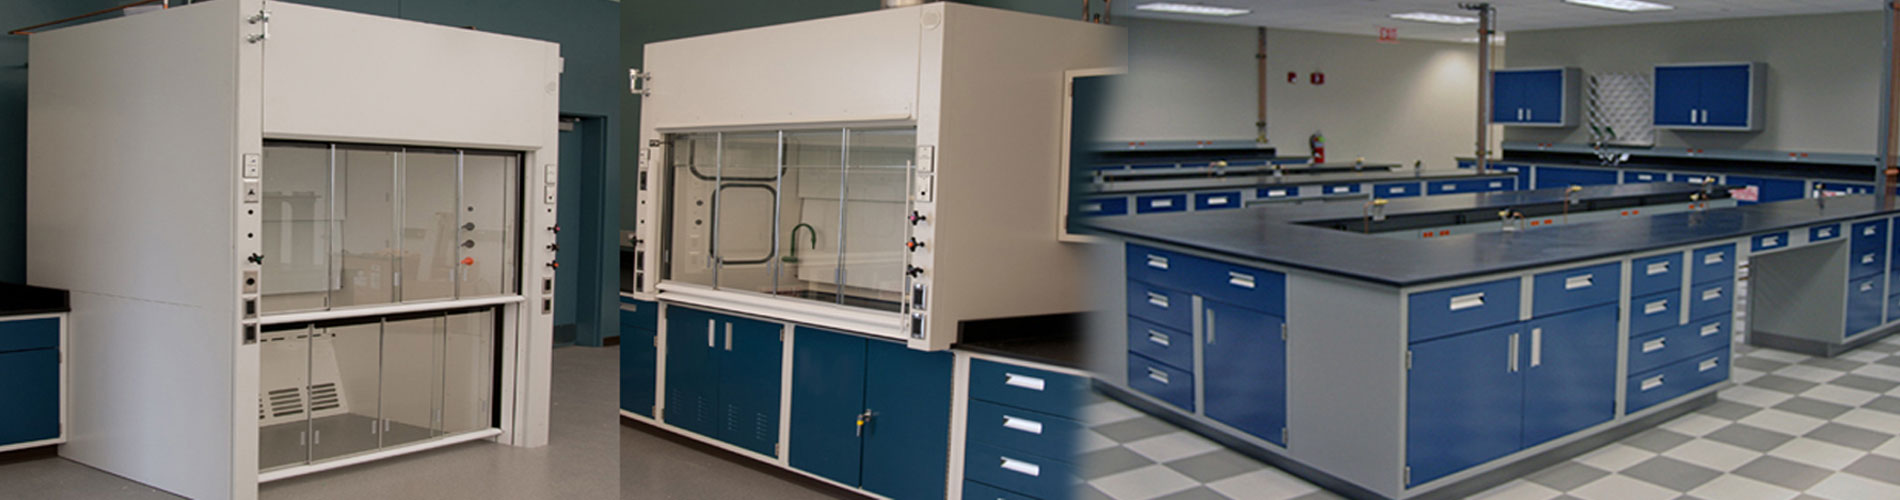 laboratory wall storage cupboards manufacturers,anti vibration bench lab tables,anti vibration bench manufacturers,anti vibration table manufacturer in Mumbai ,laboratory anti vibration table, manufacturers of laboratory anti vibration table, lab chairs and stool manufacturers, lab furniture accessories manufacturers, lab furniture accessories manufacturers in india, laboratory island bench, laboratory island bench manufacturers, workbench manufacturers, workbench manufacturers for laboratory, instrument bench manufacturers in india, instrument bench manufacturers, sink bench manufacturers in india, sink bench manufacturers, laboratory sink bench manufacturers, corner bench manufacturers, laboratory corner bench tables, laboratory benches and tables manufacturers, chemical storage cabinet manufacturers in india, wall storage cupboards for laboratory, wall storage cupboards manufacturers.